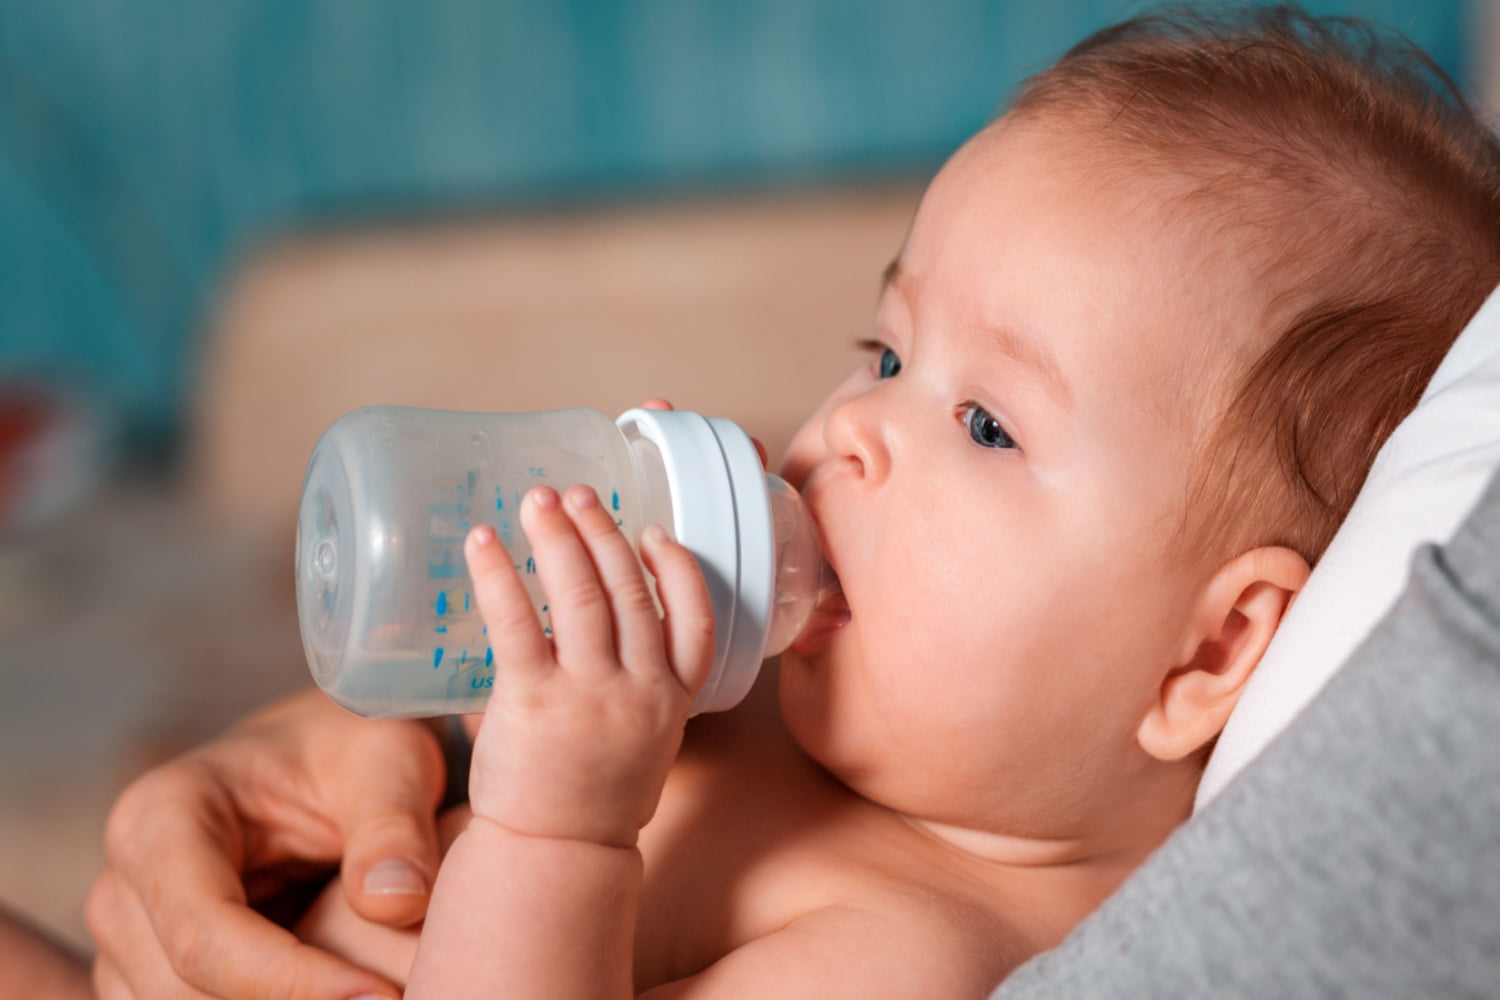 Weaning The Baby From The Bottle